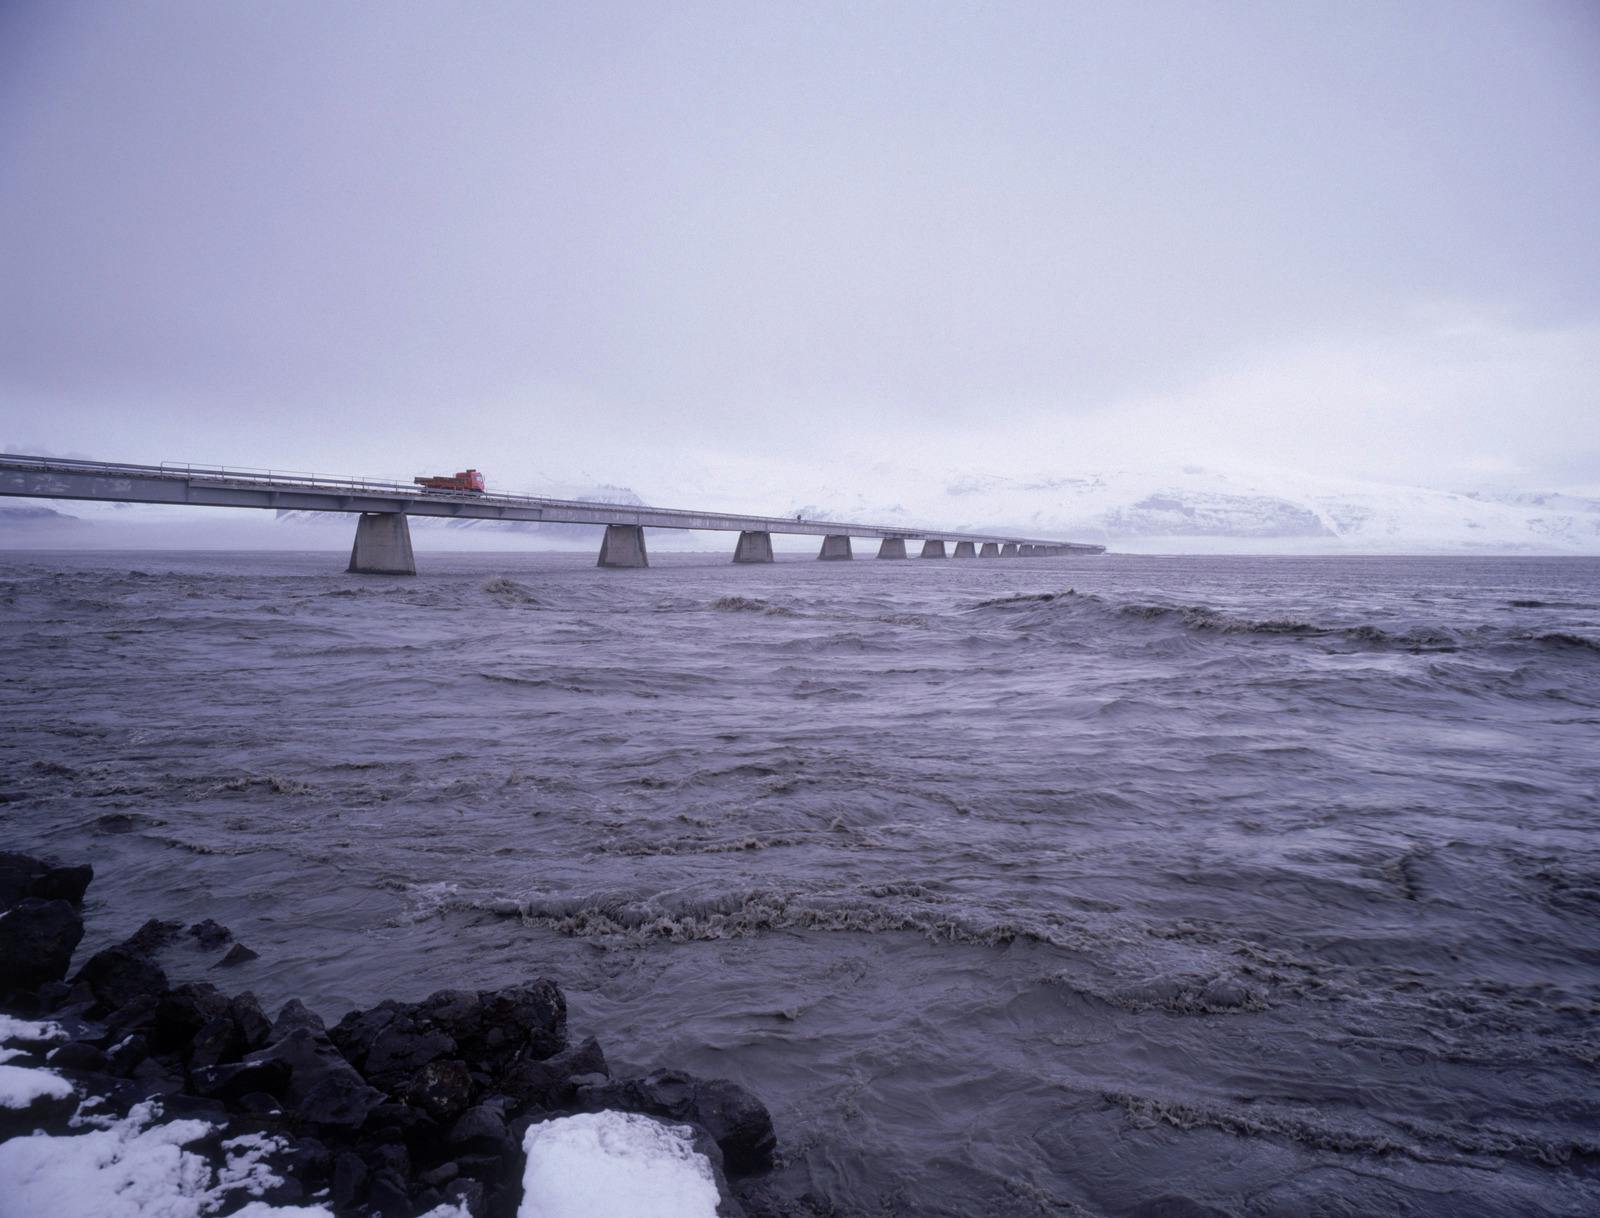 A wast and muddy river flowing under a long bridge in a jokulhlaup